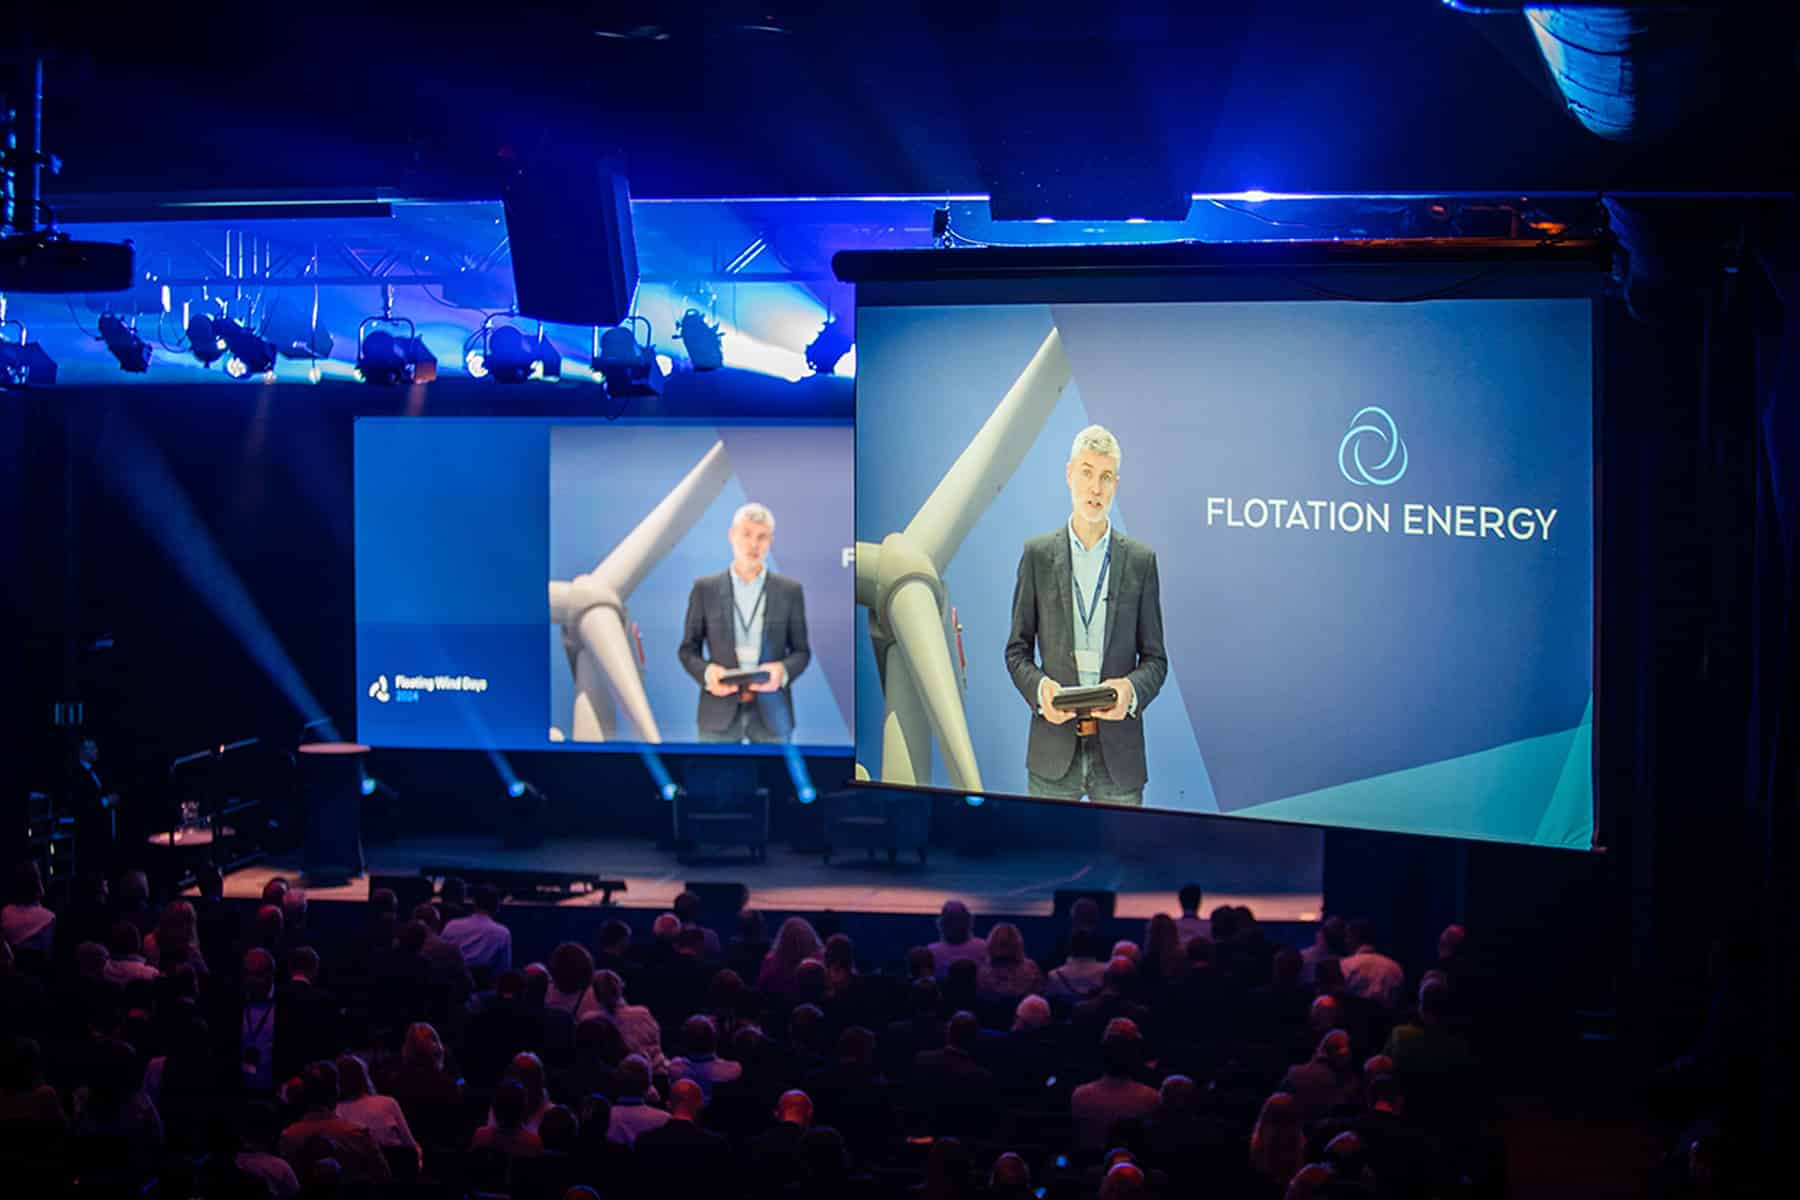 Flotation Energy wins history’s first Floating Wind Award